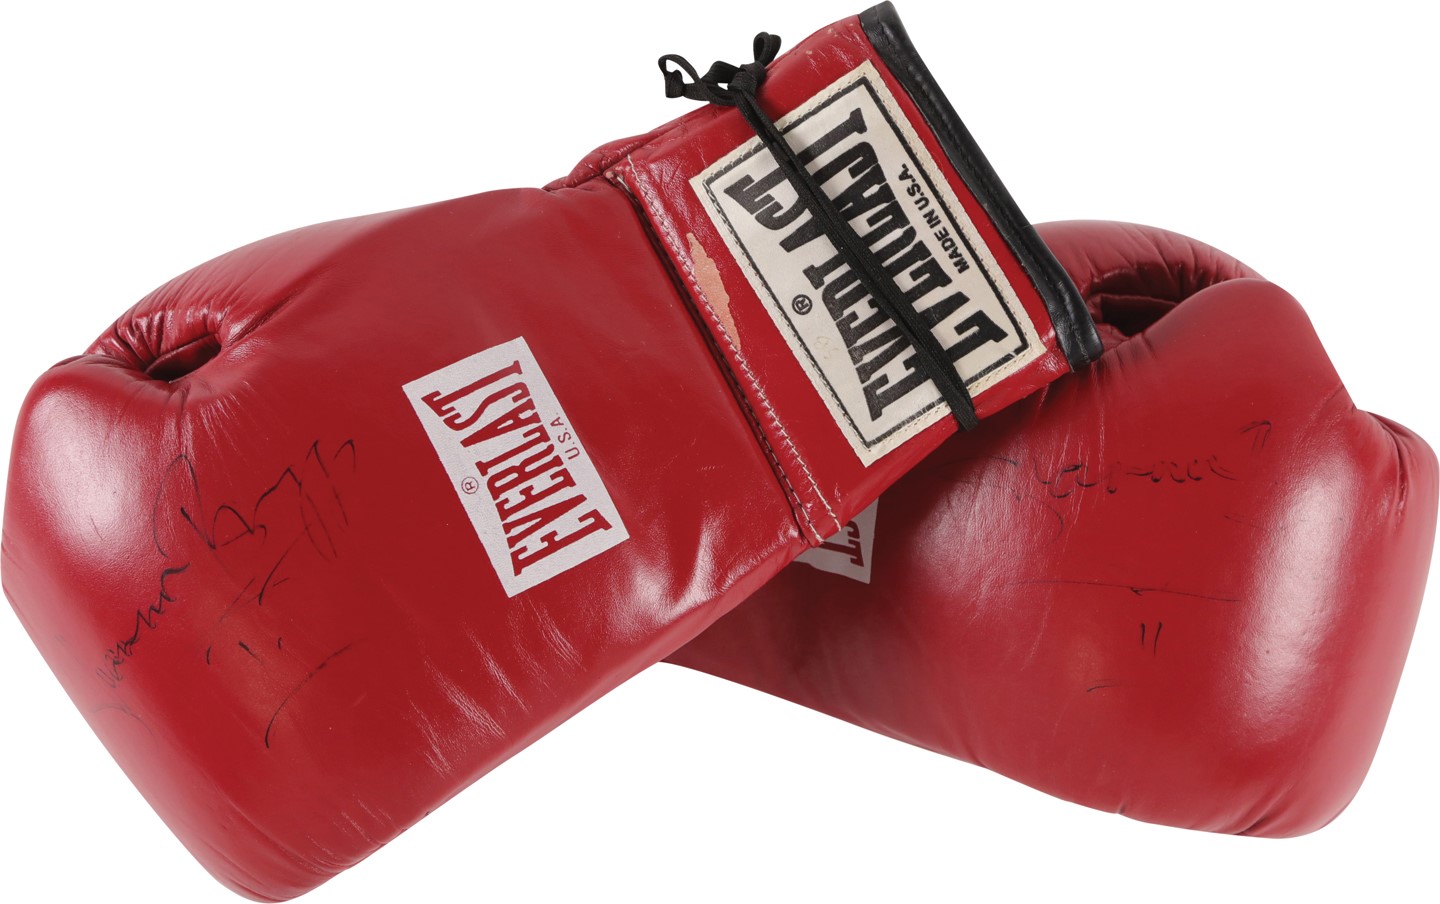 3/6/04 Shannon Briggs Signed Fight Worn Boxing Gloves vs. Jeff Peagues (Promoter LOA)